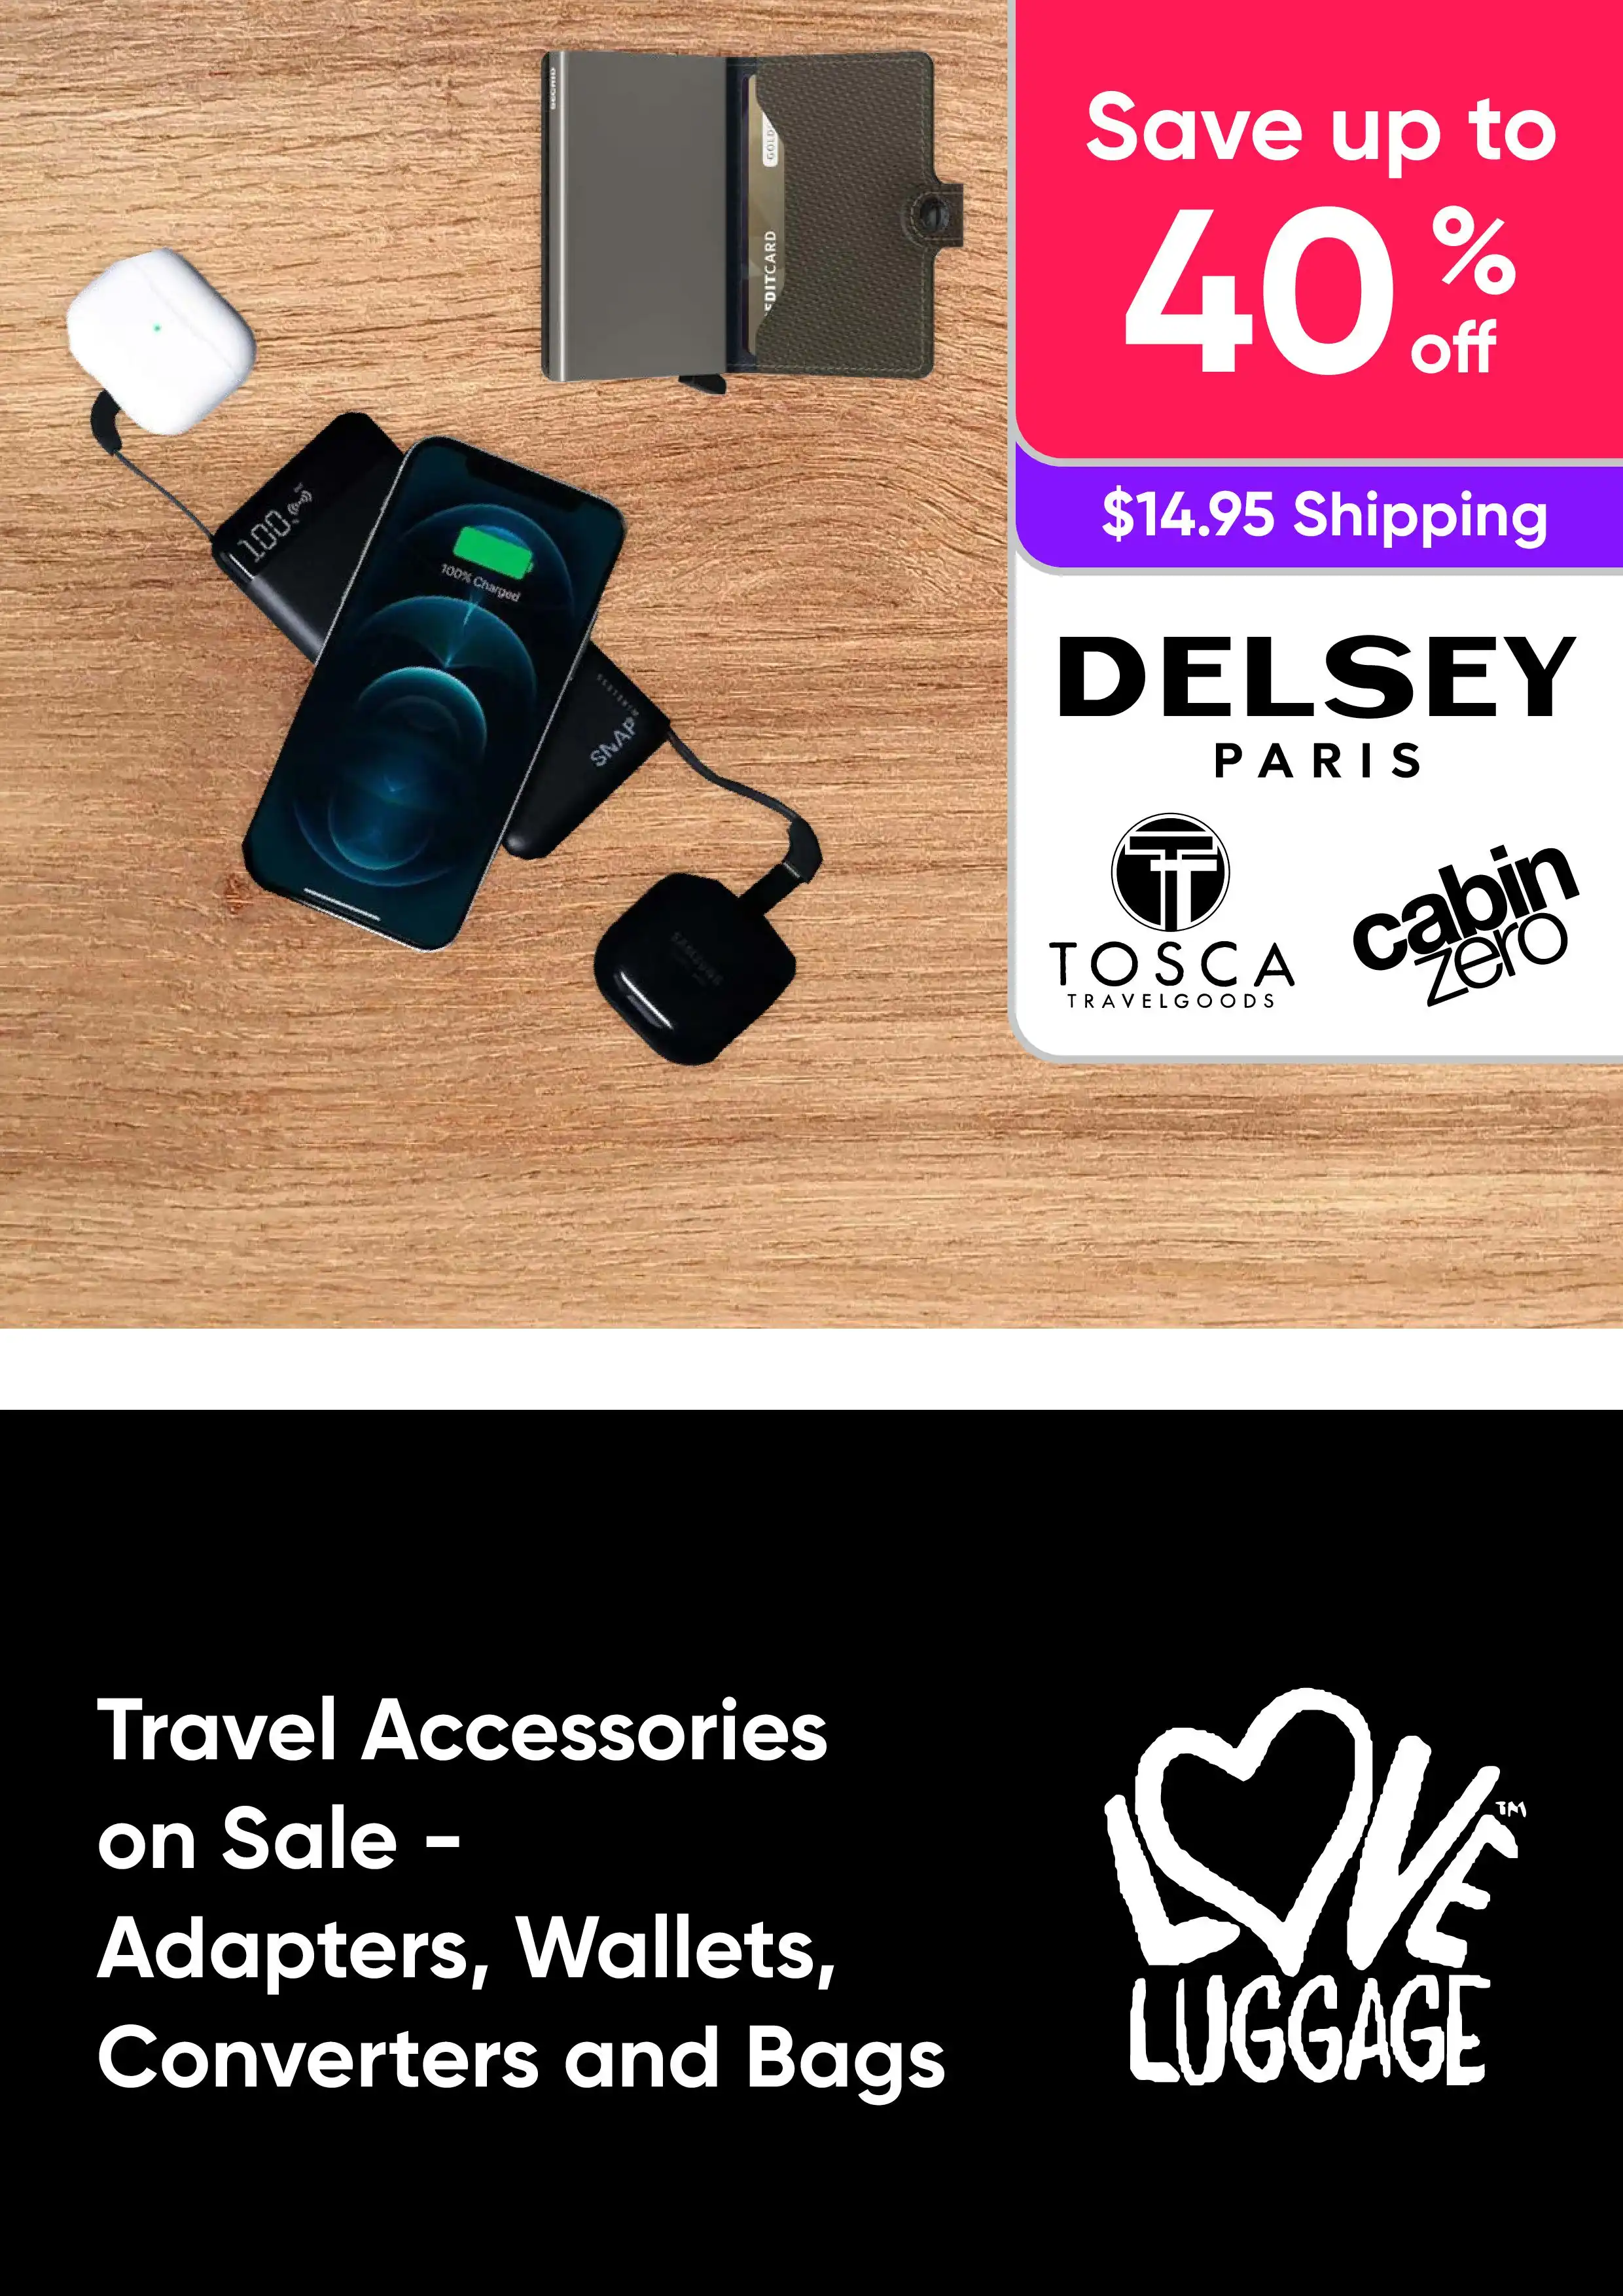 Travel Accessories on Sale - Save up to 40% Off a Range of Adapters, Wallets, Converters and Bags